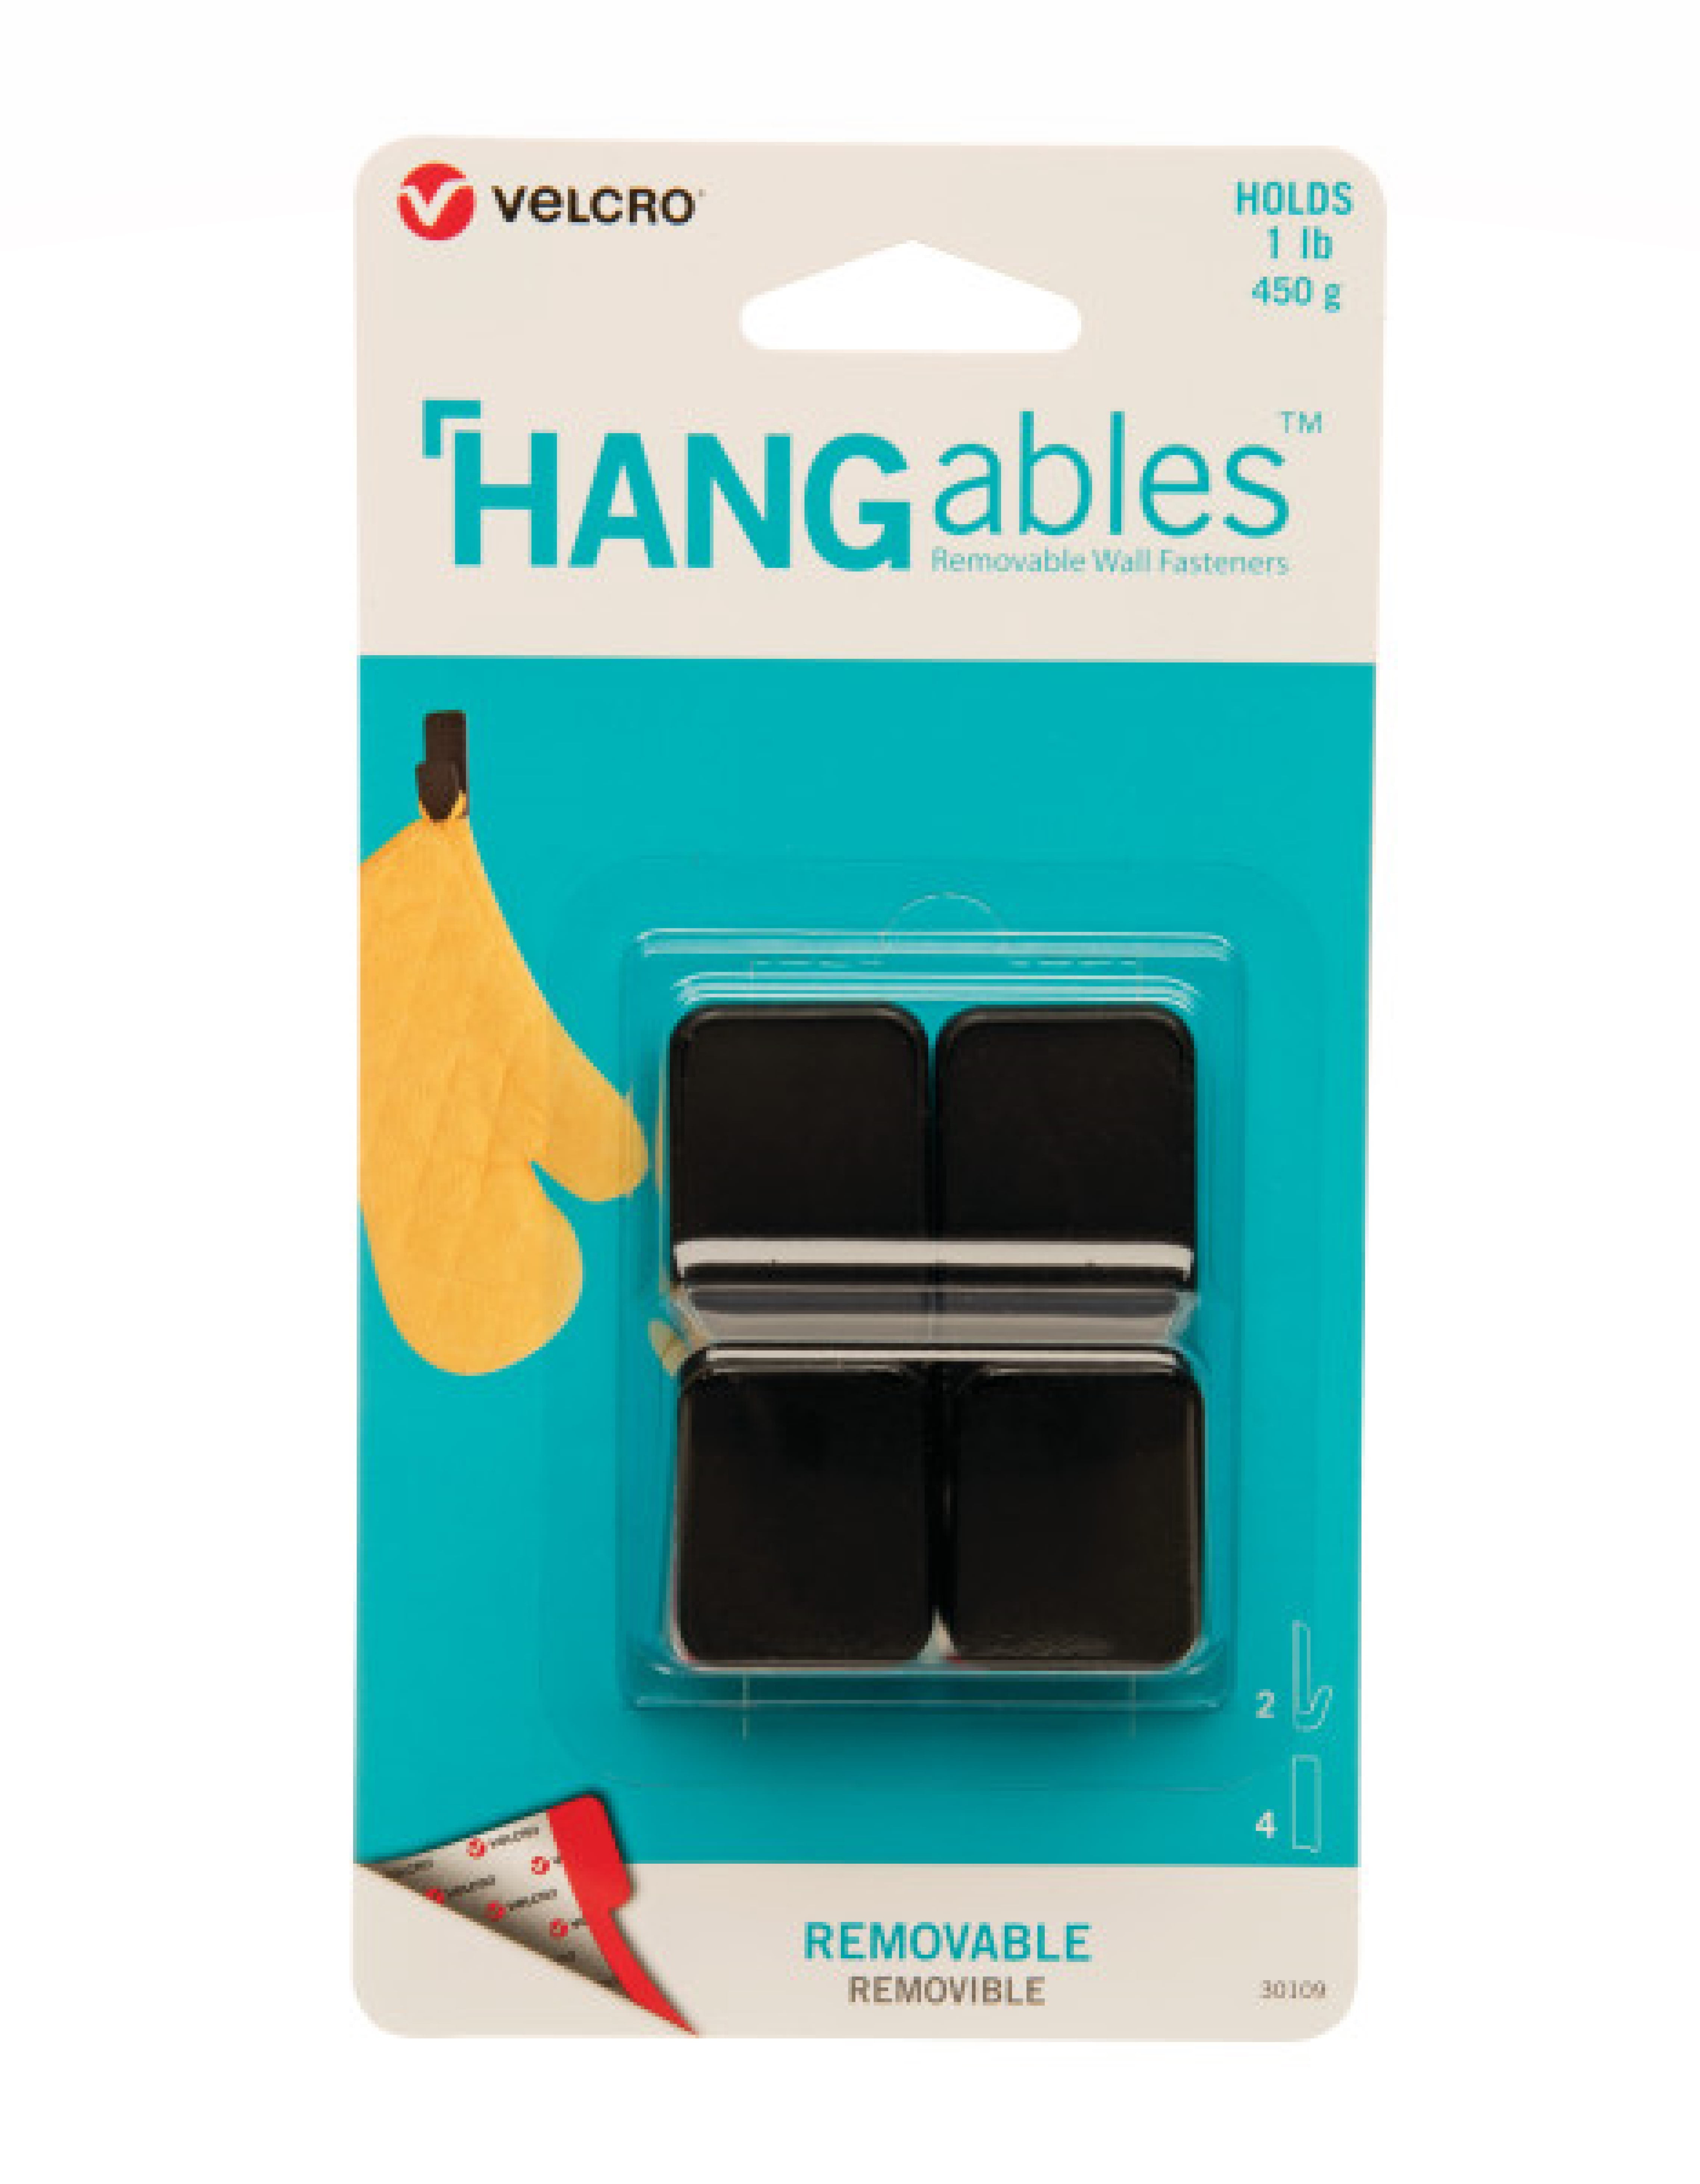  VELCRO Brand HANGables Removable Wall Fasteners, Strong  Adhesive Hold, Up to 7.5 kg / 16 ½ lb (per set of 4)